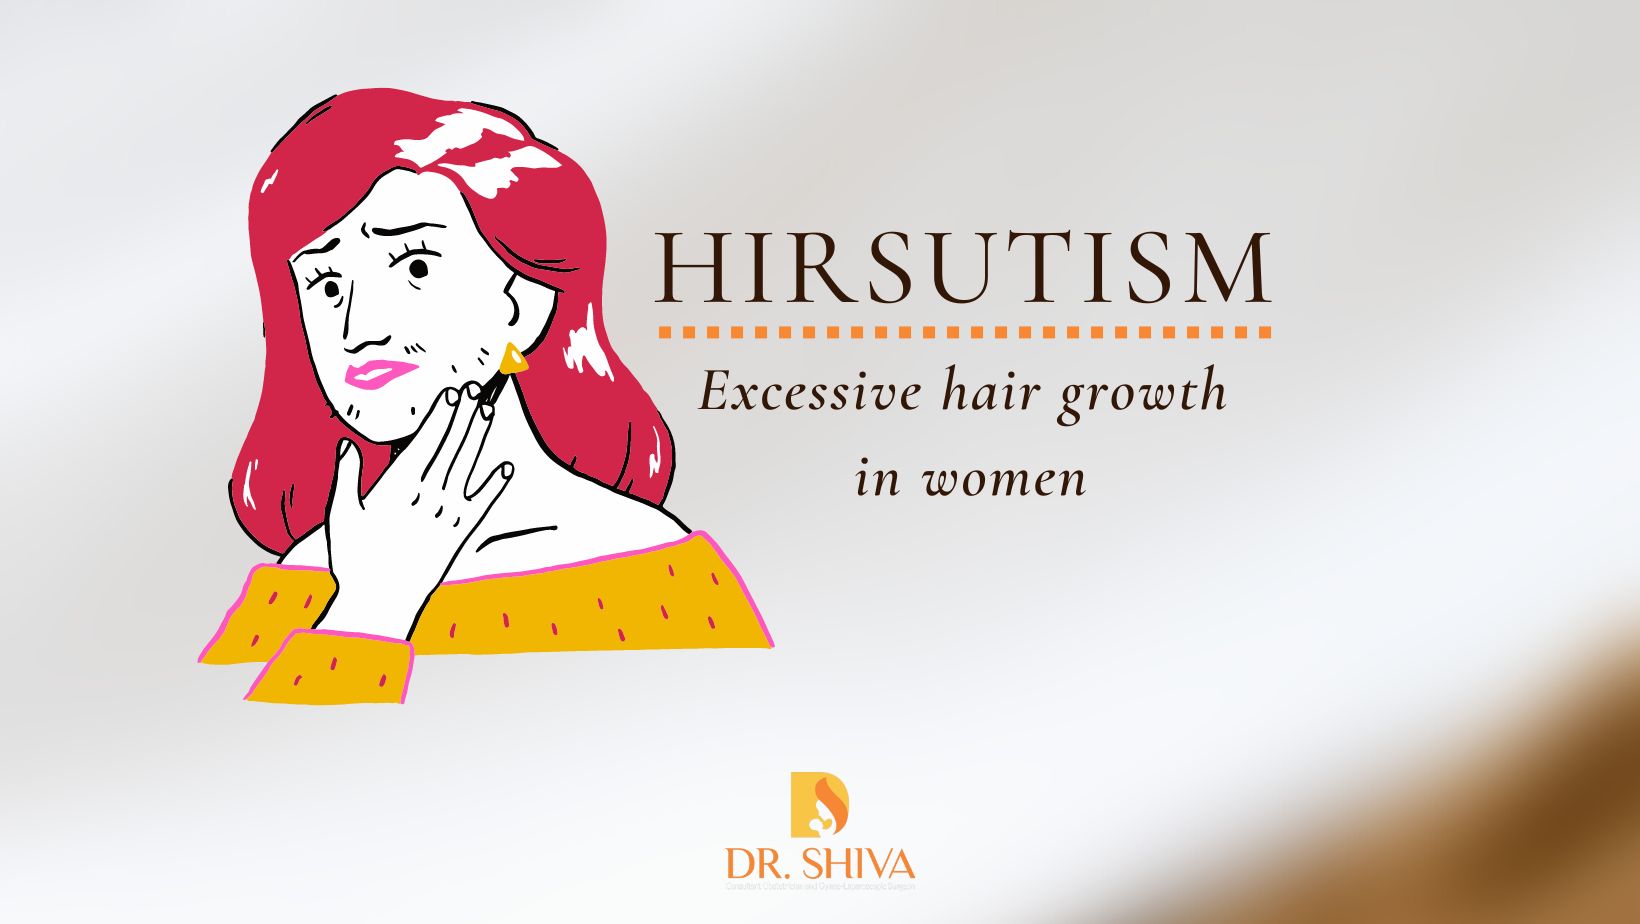 Excessive hair growth in women